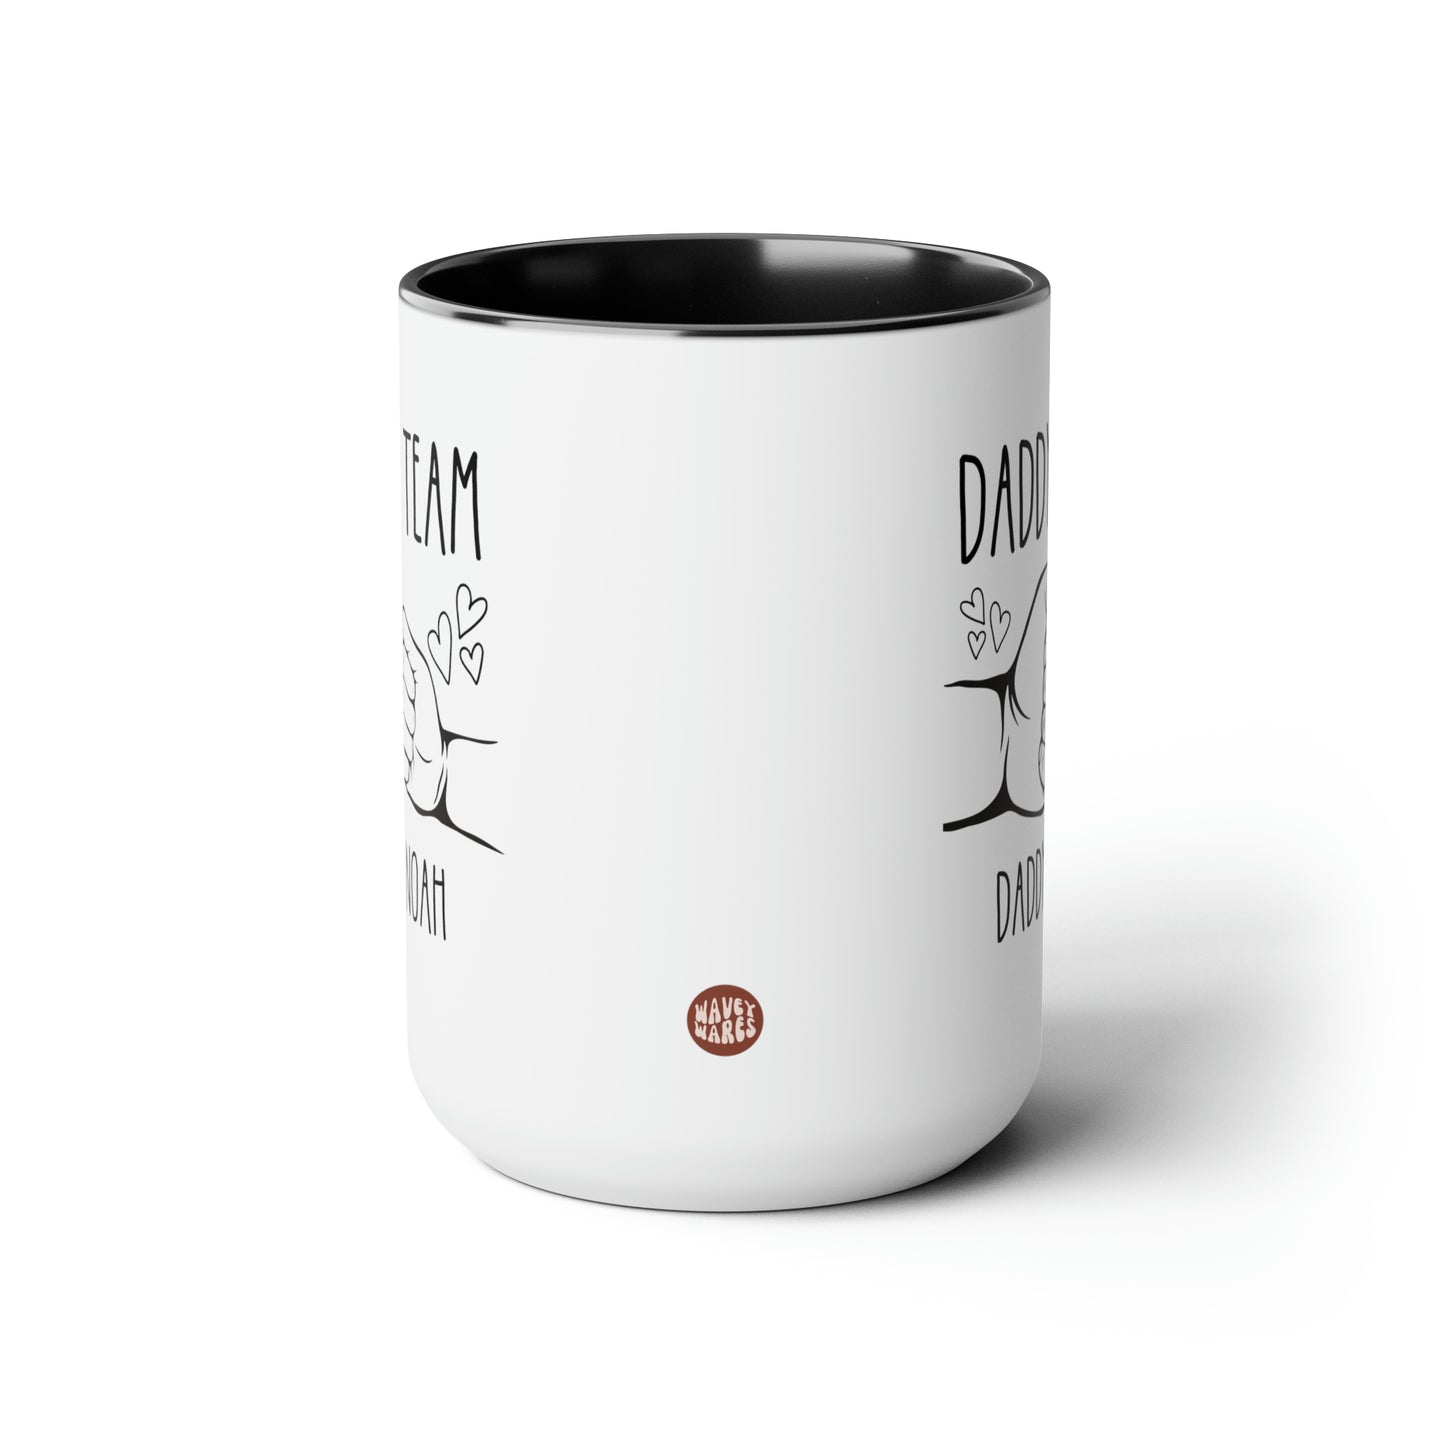 Daddy's Team 15oz white with black accent funny large coffee mug gift for dad father's day from kids name customize personalize grandfather fist bump hearts waveywares wavey wares wavywares wavy wares side